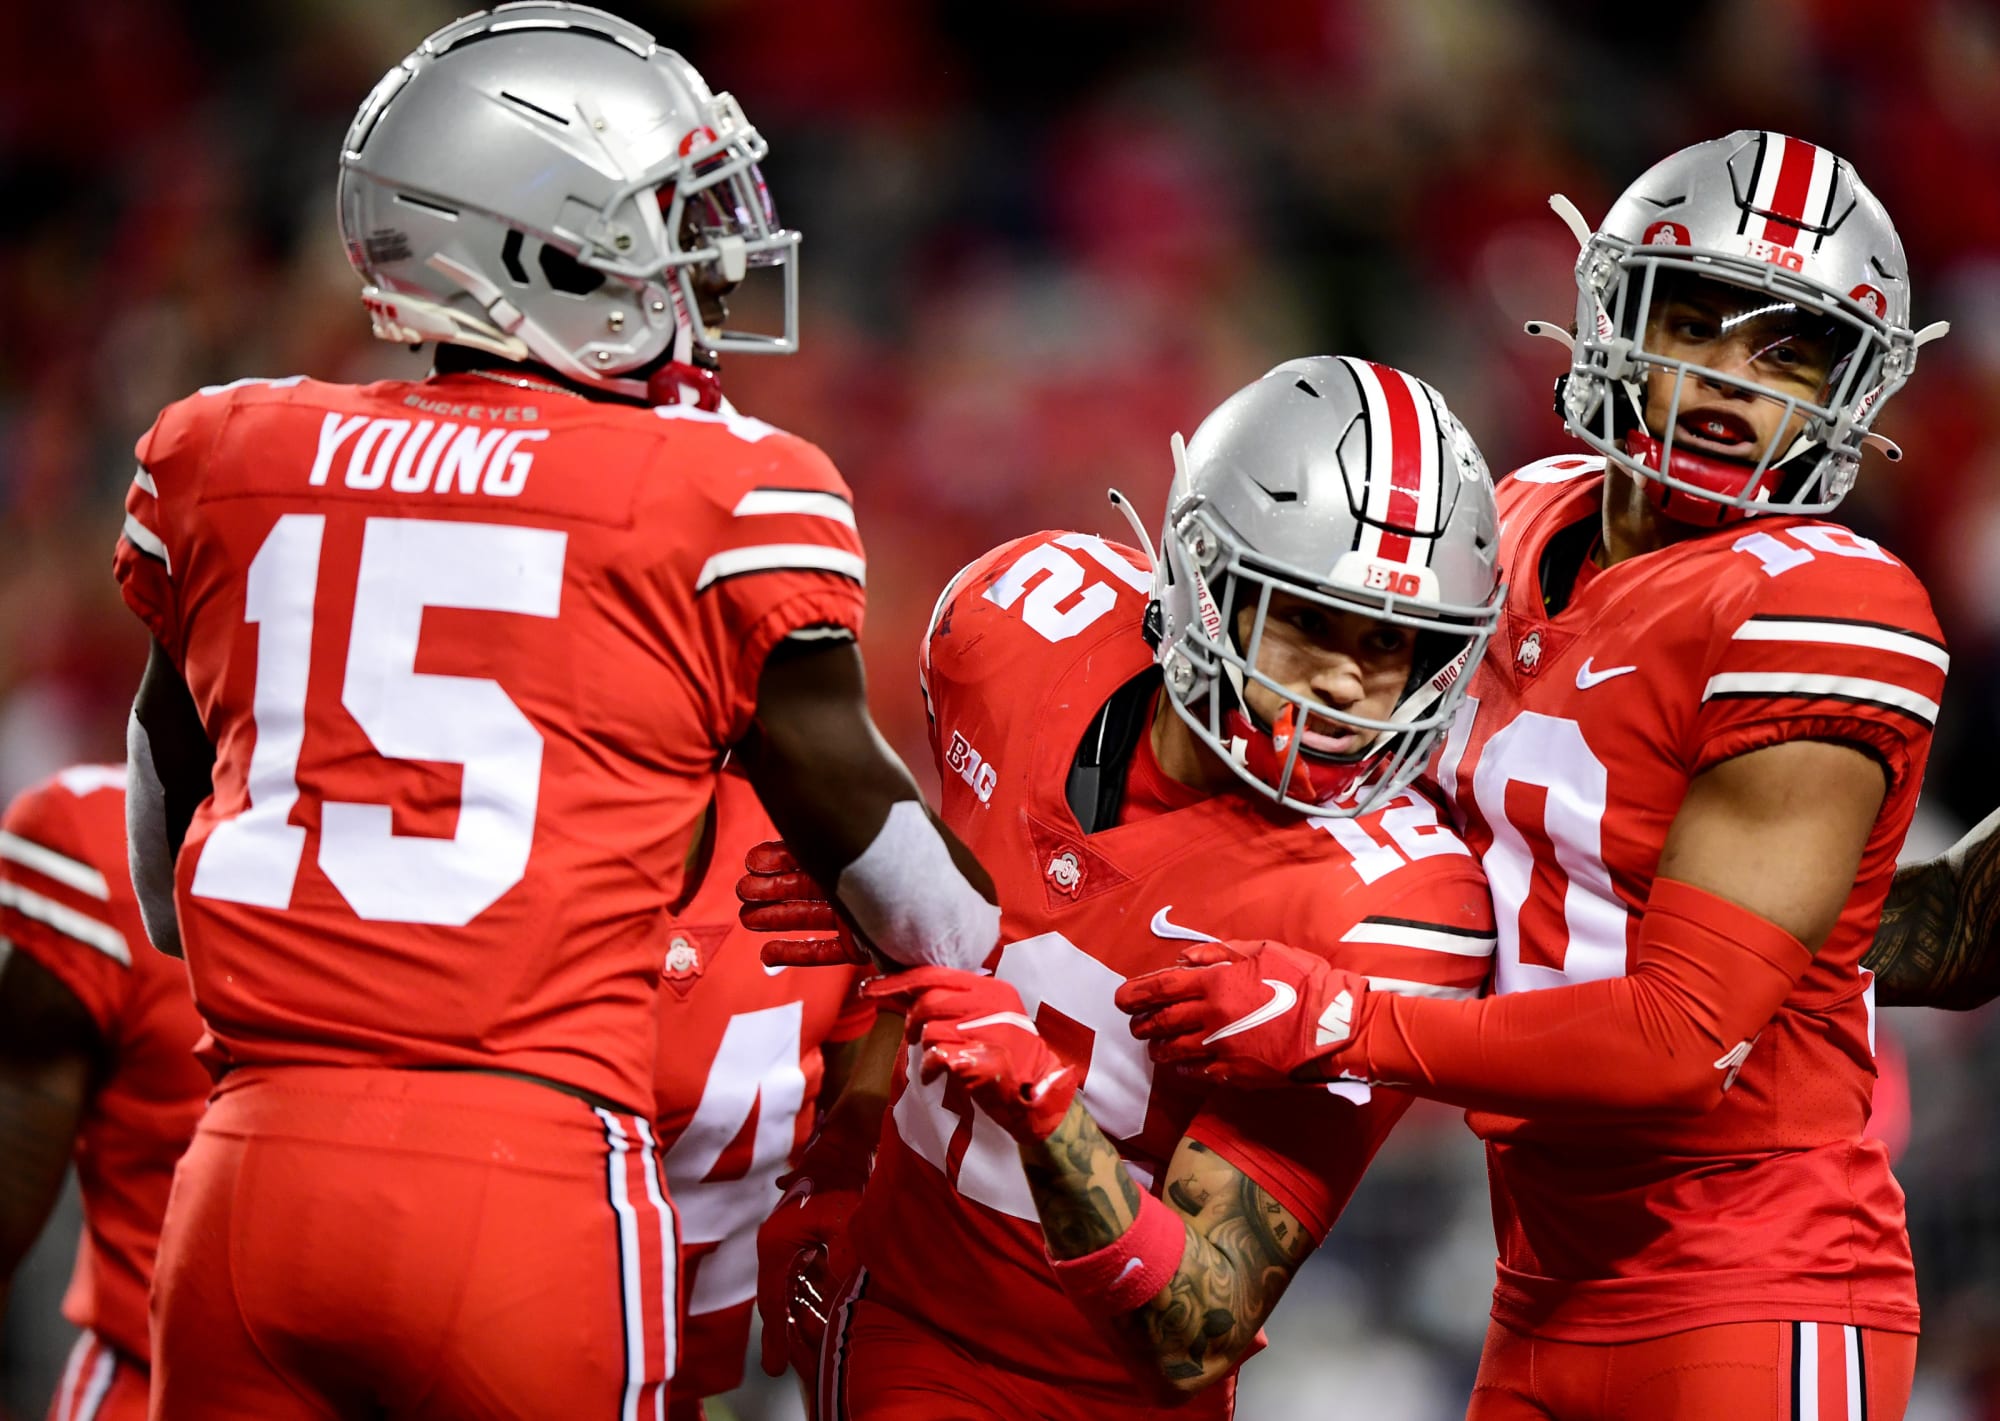 Ohio State football: Why the Buckeyes’ defense will thrive against Wisconsin